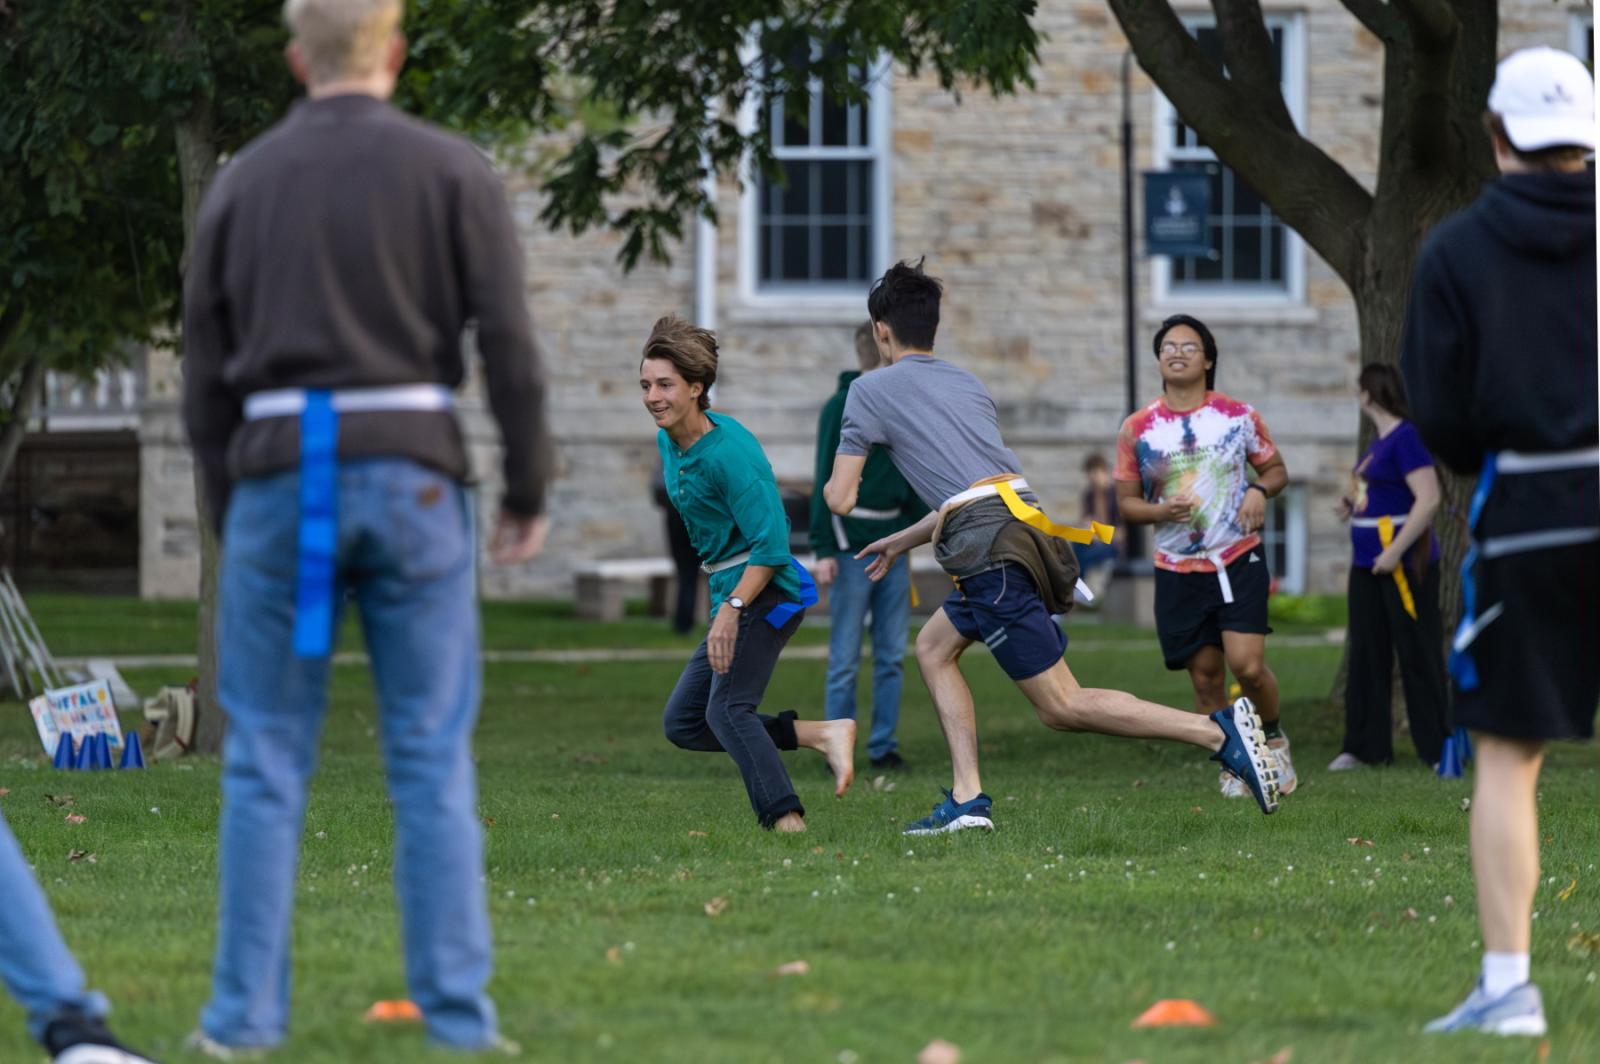 Students run on Main Hall Green while playing outdoor games.